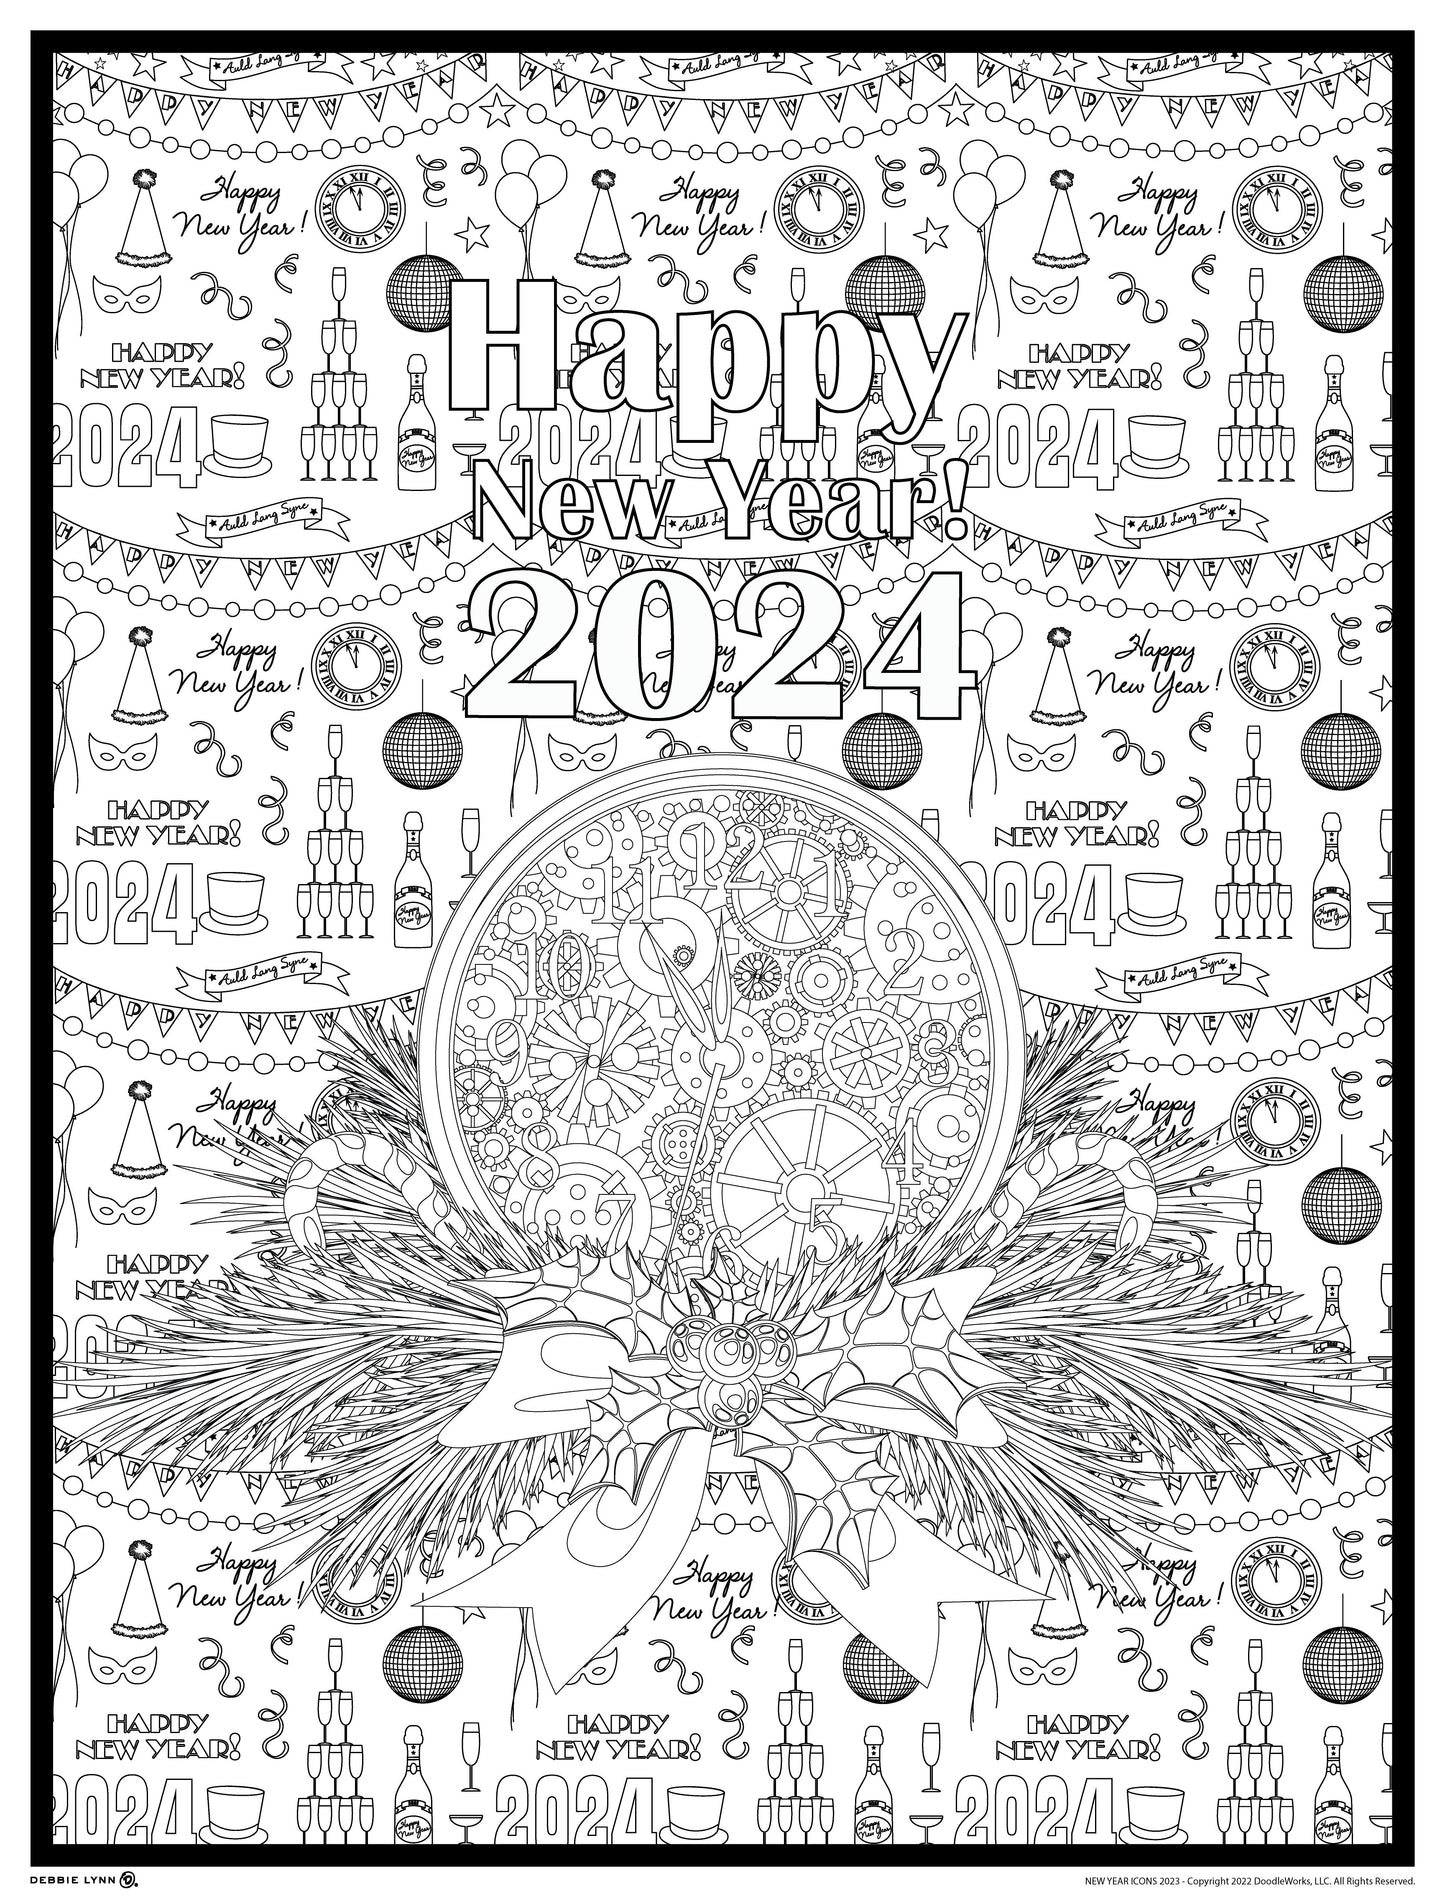 New Year Icons Giant Poster